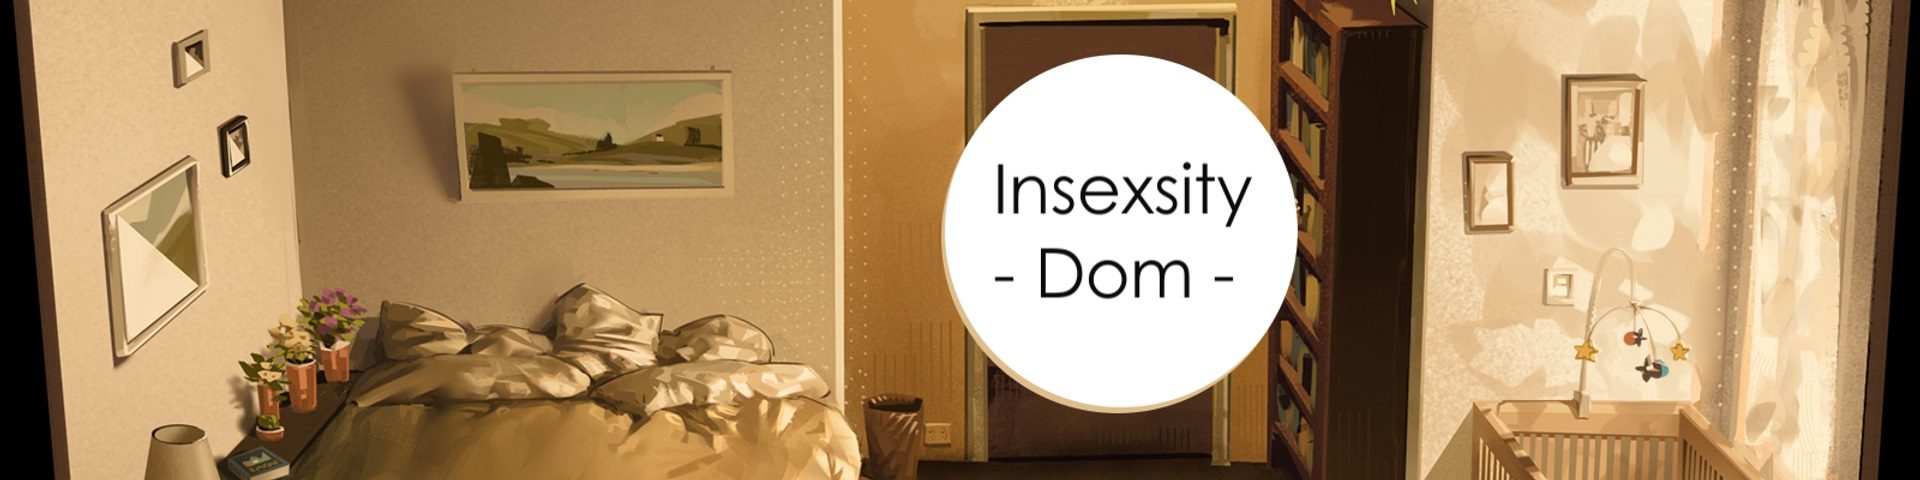 Insexsity 2 Dom [Insexsity team] Adult xxx Game Download